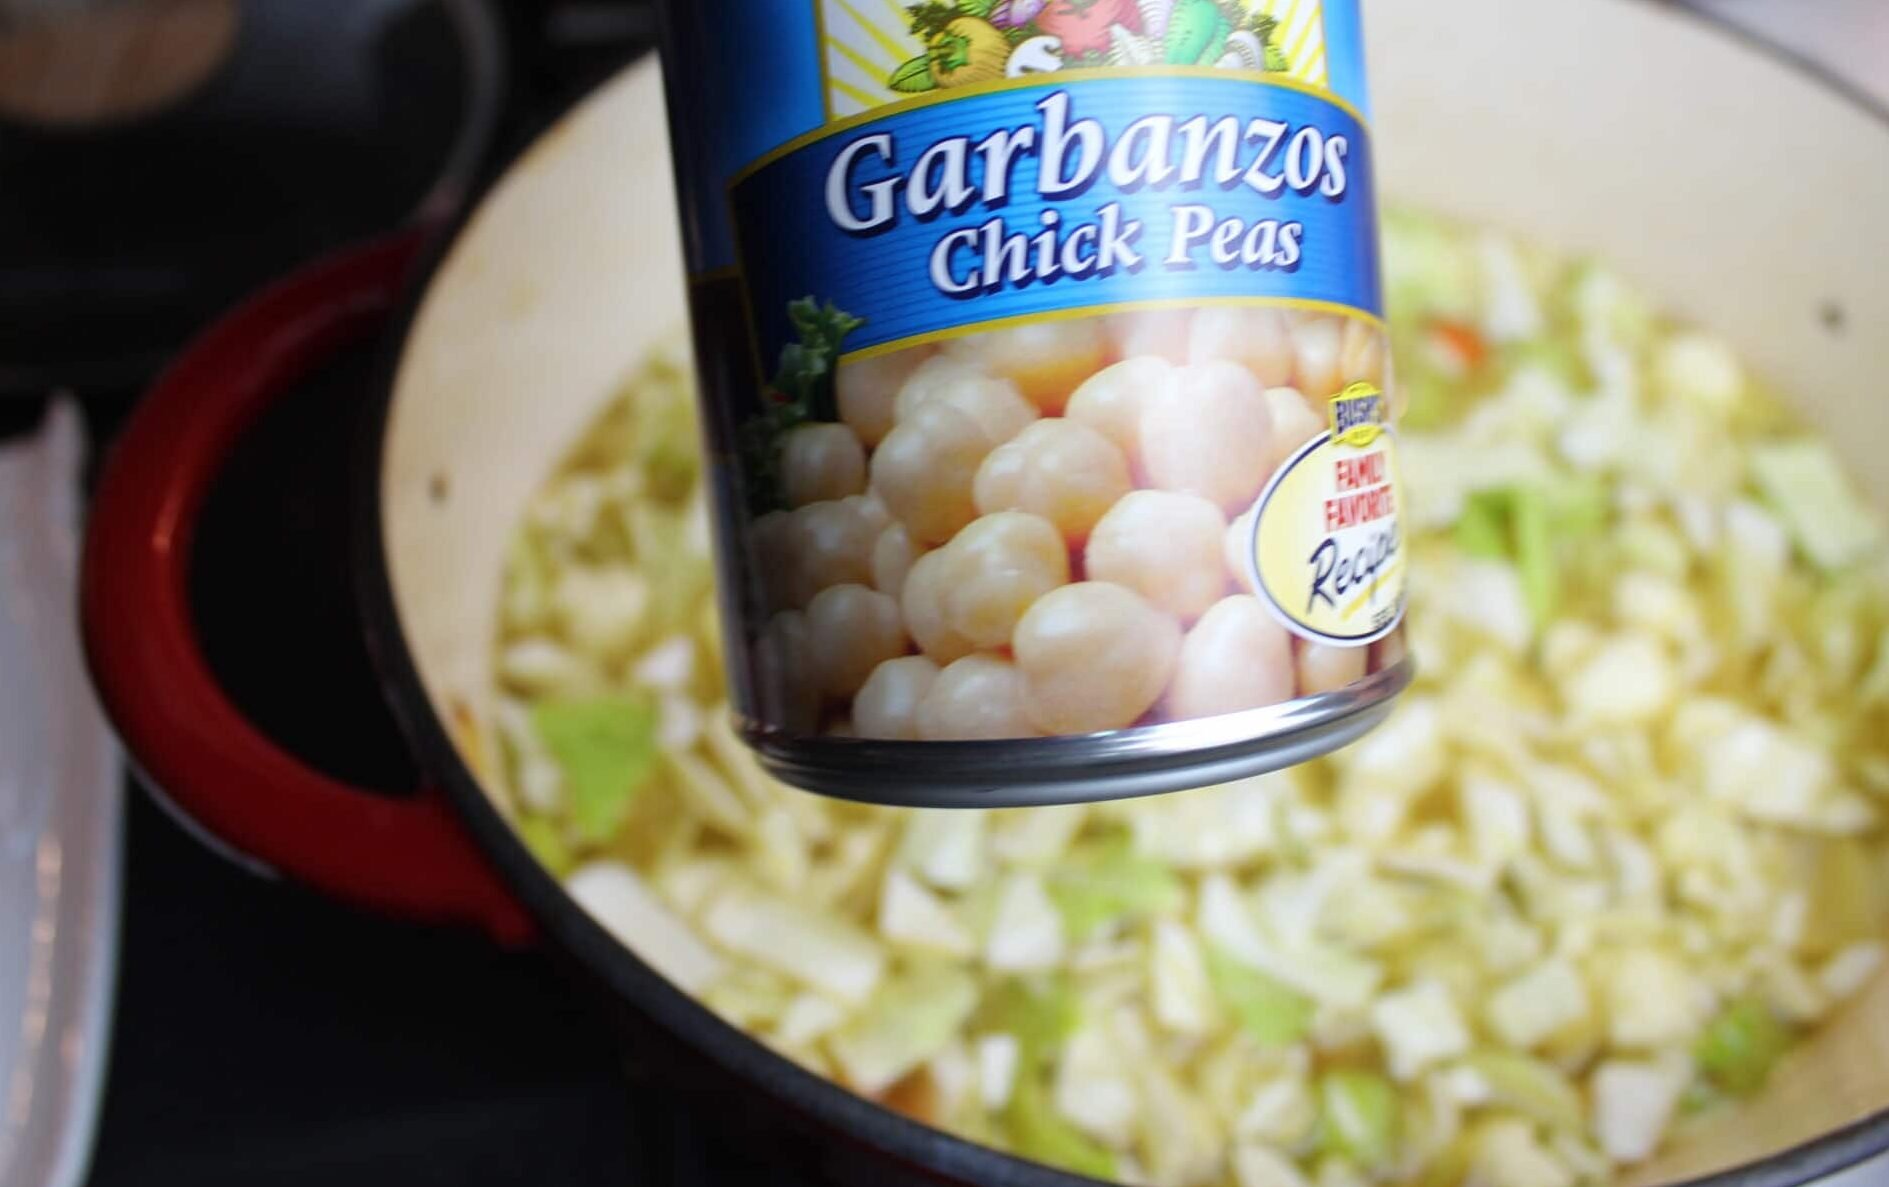 chick peas, also known as garbanzo beans